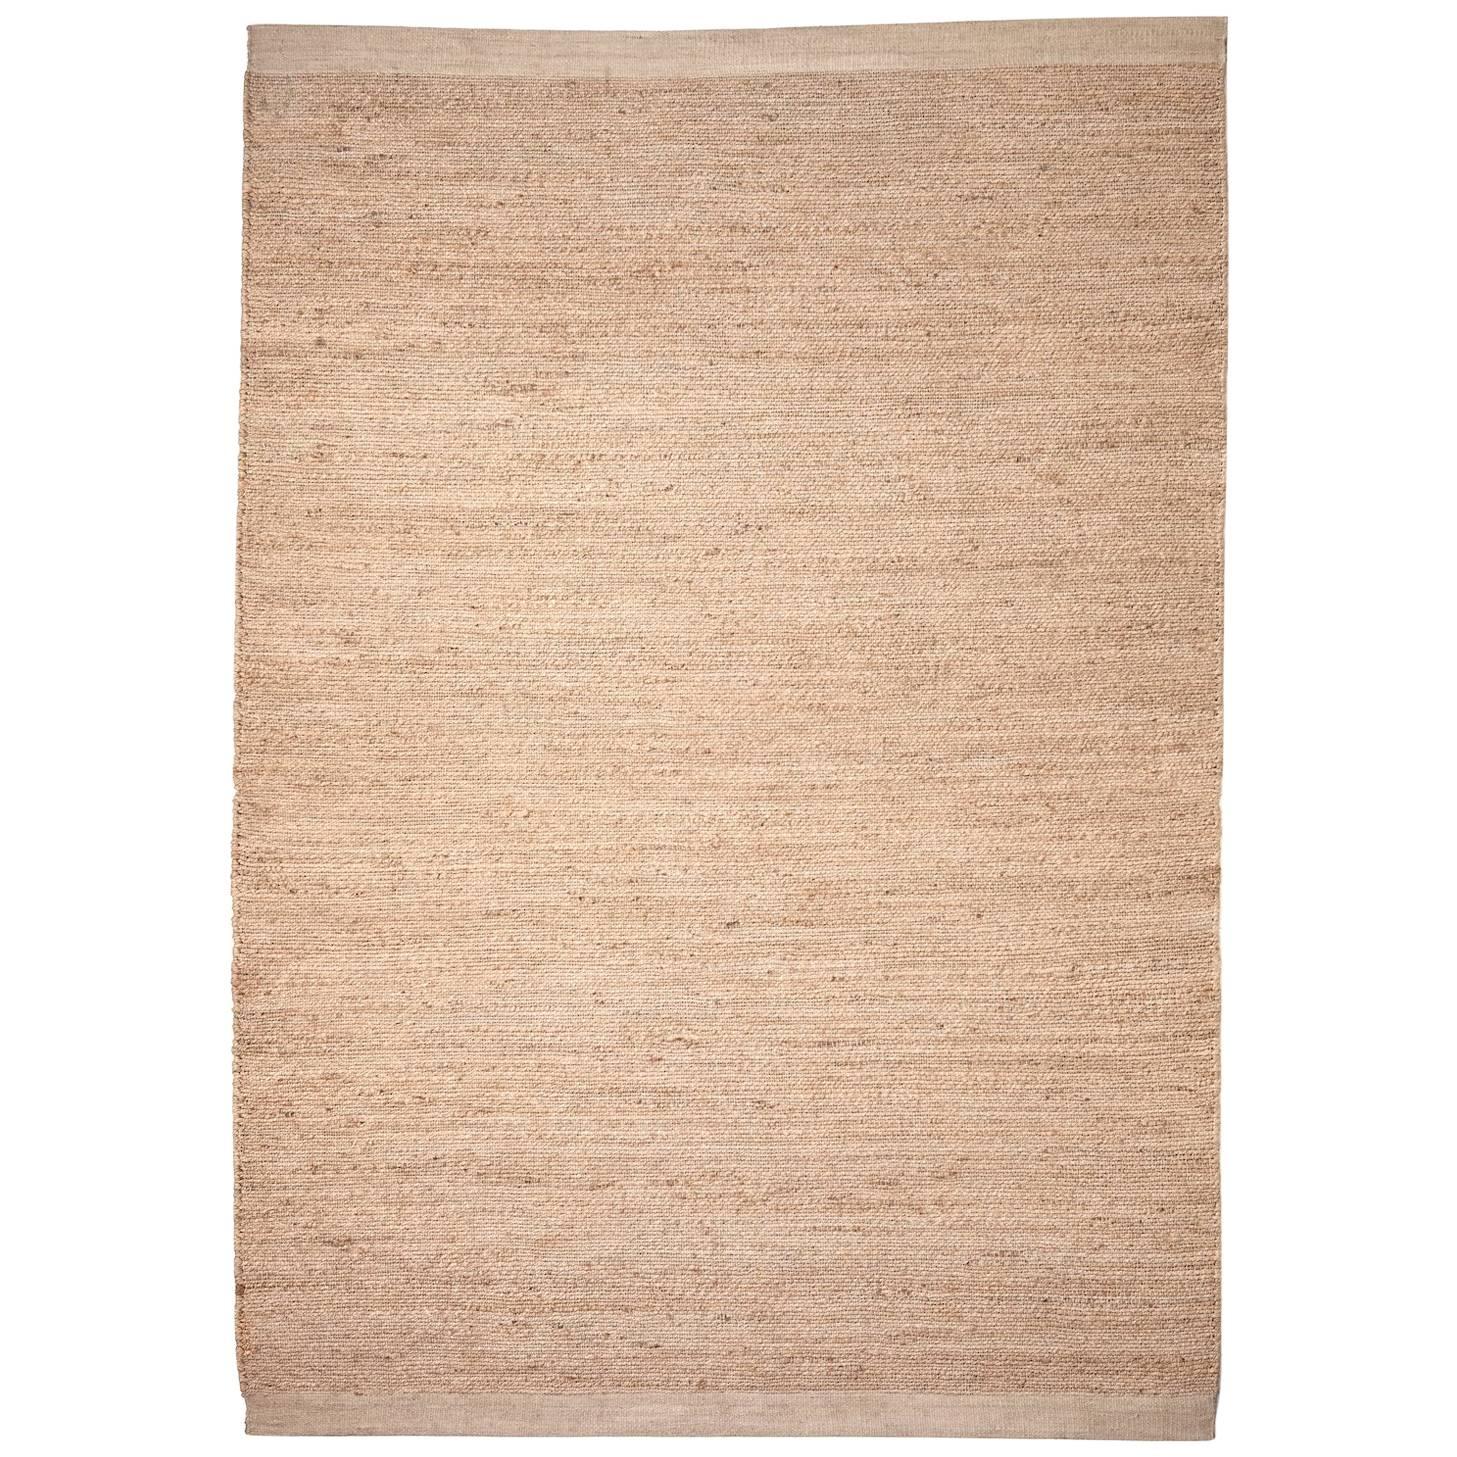 Hand-Loomed Herb Rug by Nani Marquina in Natural, Extra Large For Sale